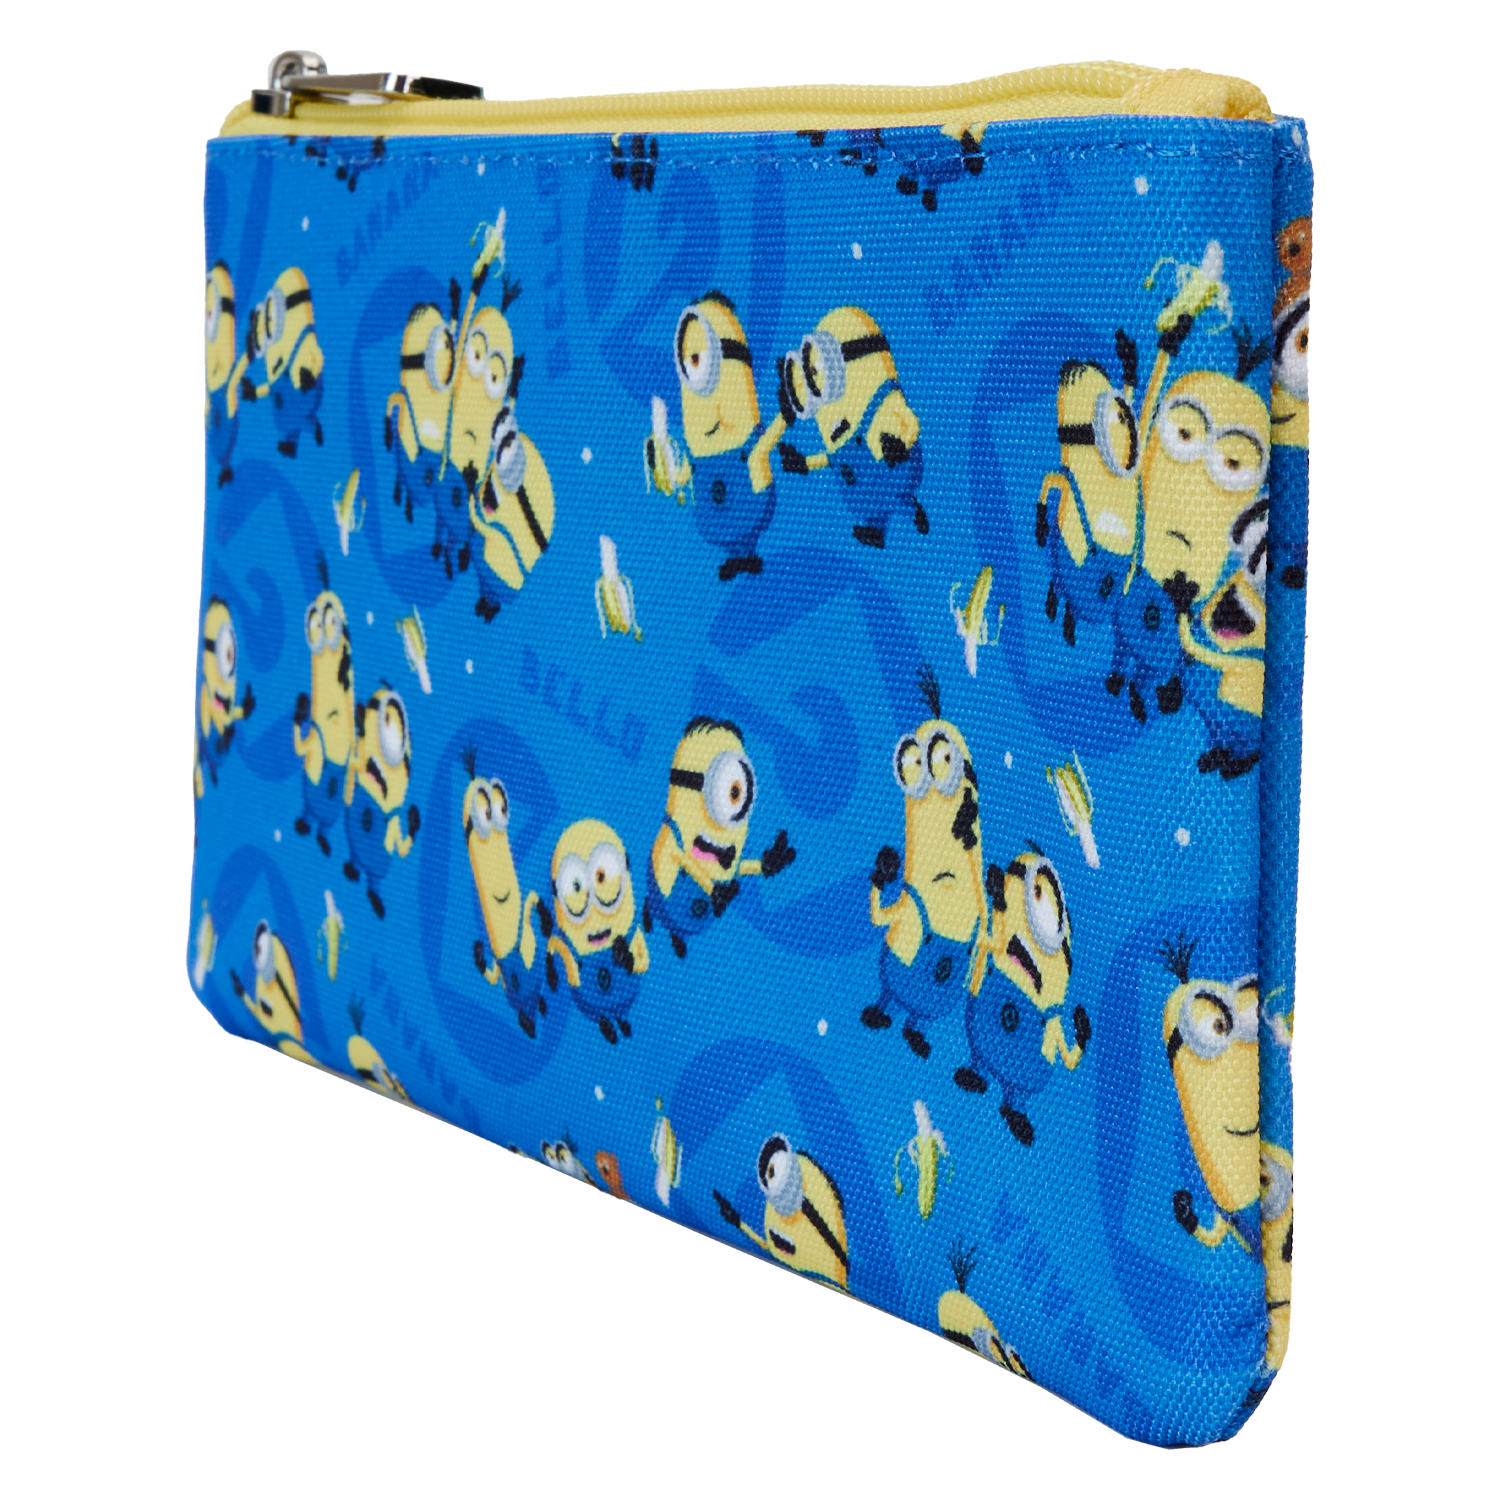 Buy Despicable Me Minions All Over Print Nylon Zipper Pouch Wristlet At